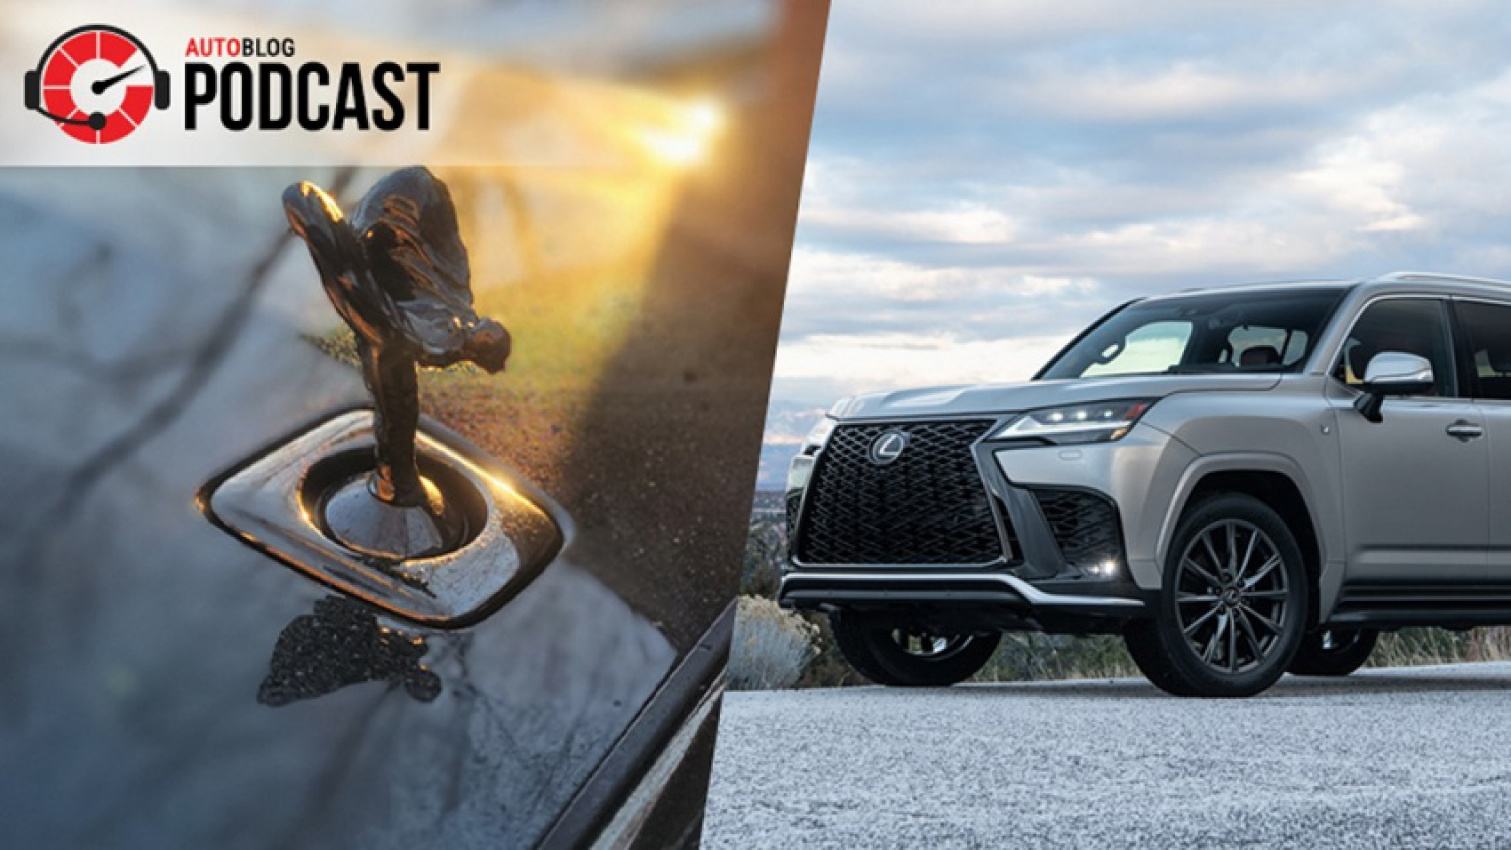 autos, cars, dodge, lexus, infiniti, luxury, off-road vehicles, podcasts, rolls-royce, sedan, toyota, used car buying, lexus lx 600 first impressions, a $485k rolls and old dodge vipers | autoblog podcast #718